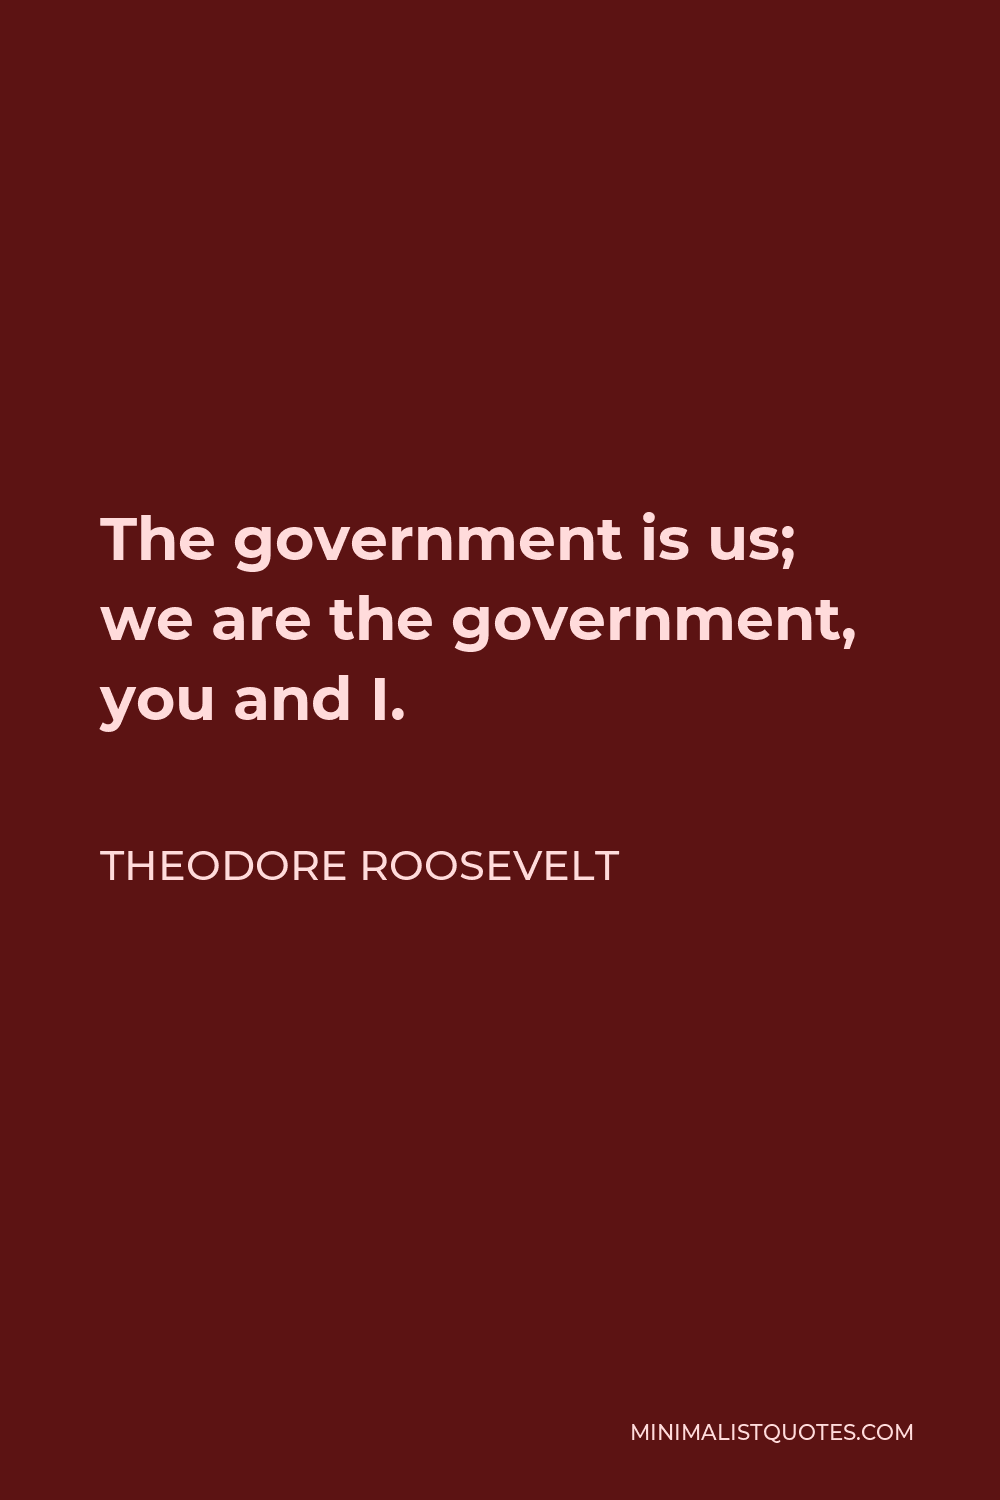 Theodore Roosevelt Quote - The government is us; we are the government, you and I.